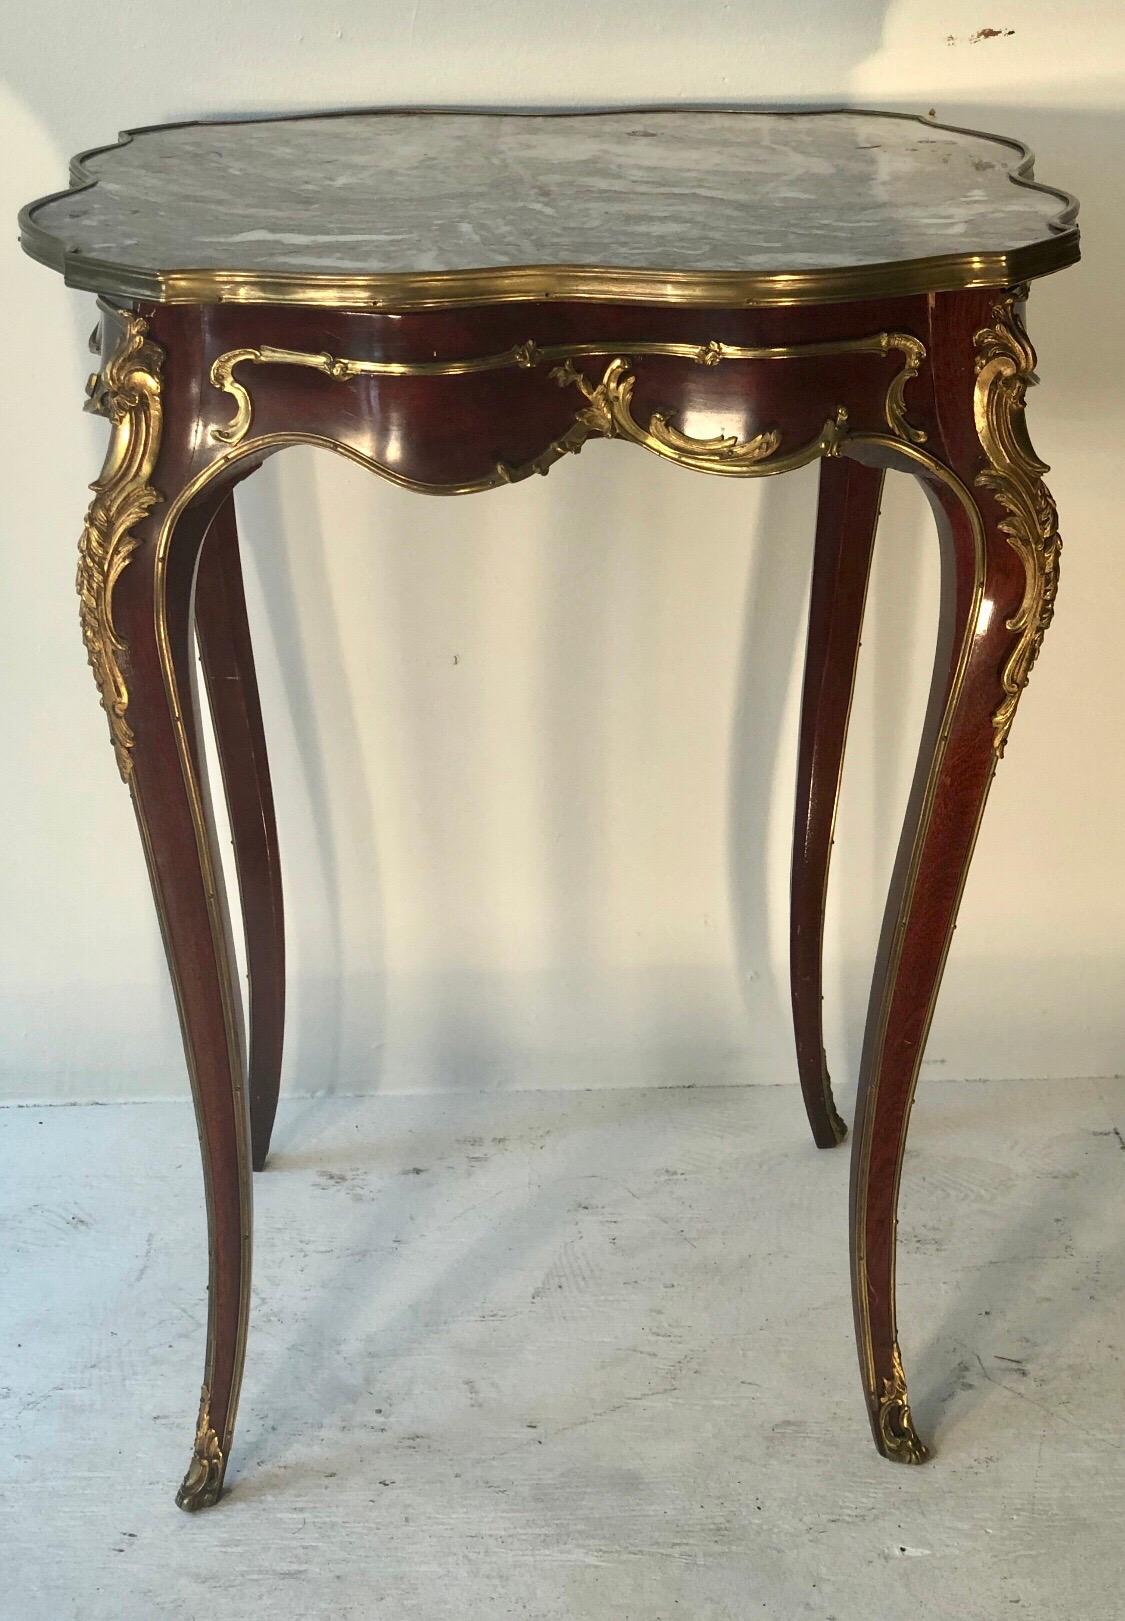 This elegant Louis XV style marble-top side table has mahogany veneer with bronze Doré mounts, late 19th century. The marble inset top is above a band frieze with ormolu-mounts. The table stands on four cabriole legs with bronze mounts terminating